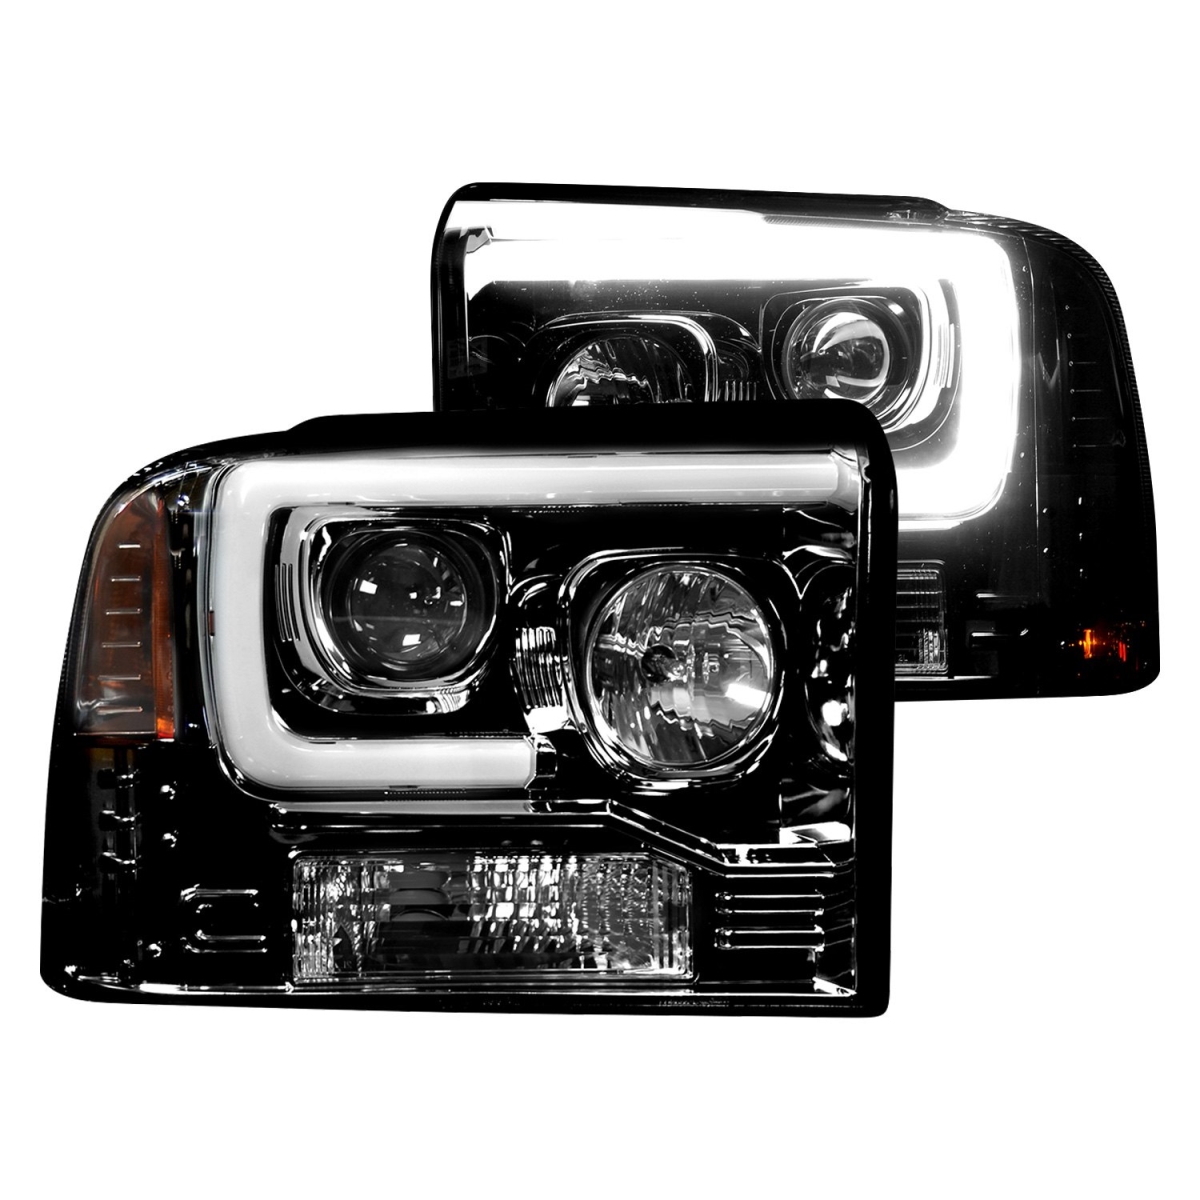 Rec264193bkc Projector Headlights With High Power Oem Led Halos & Drl For 2005-2007 F250, F350, F450 & F550, Smoked & Black